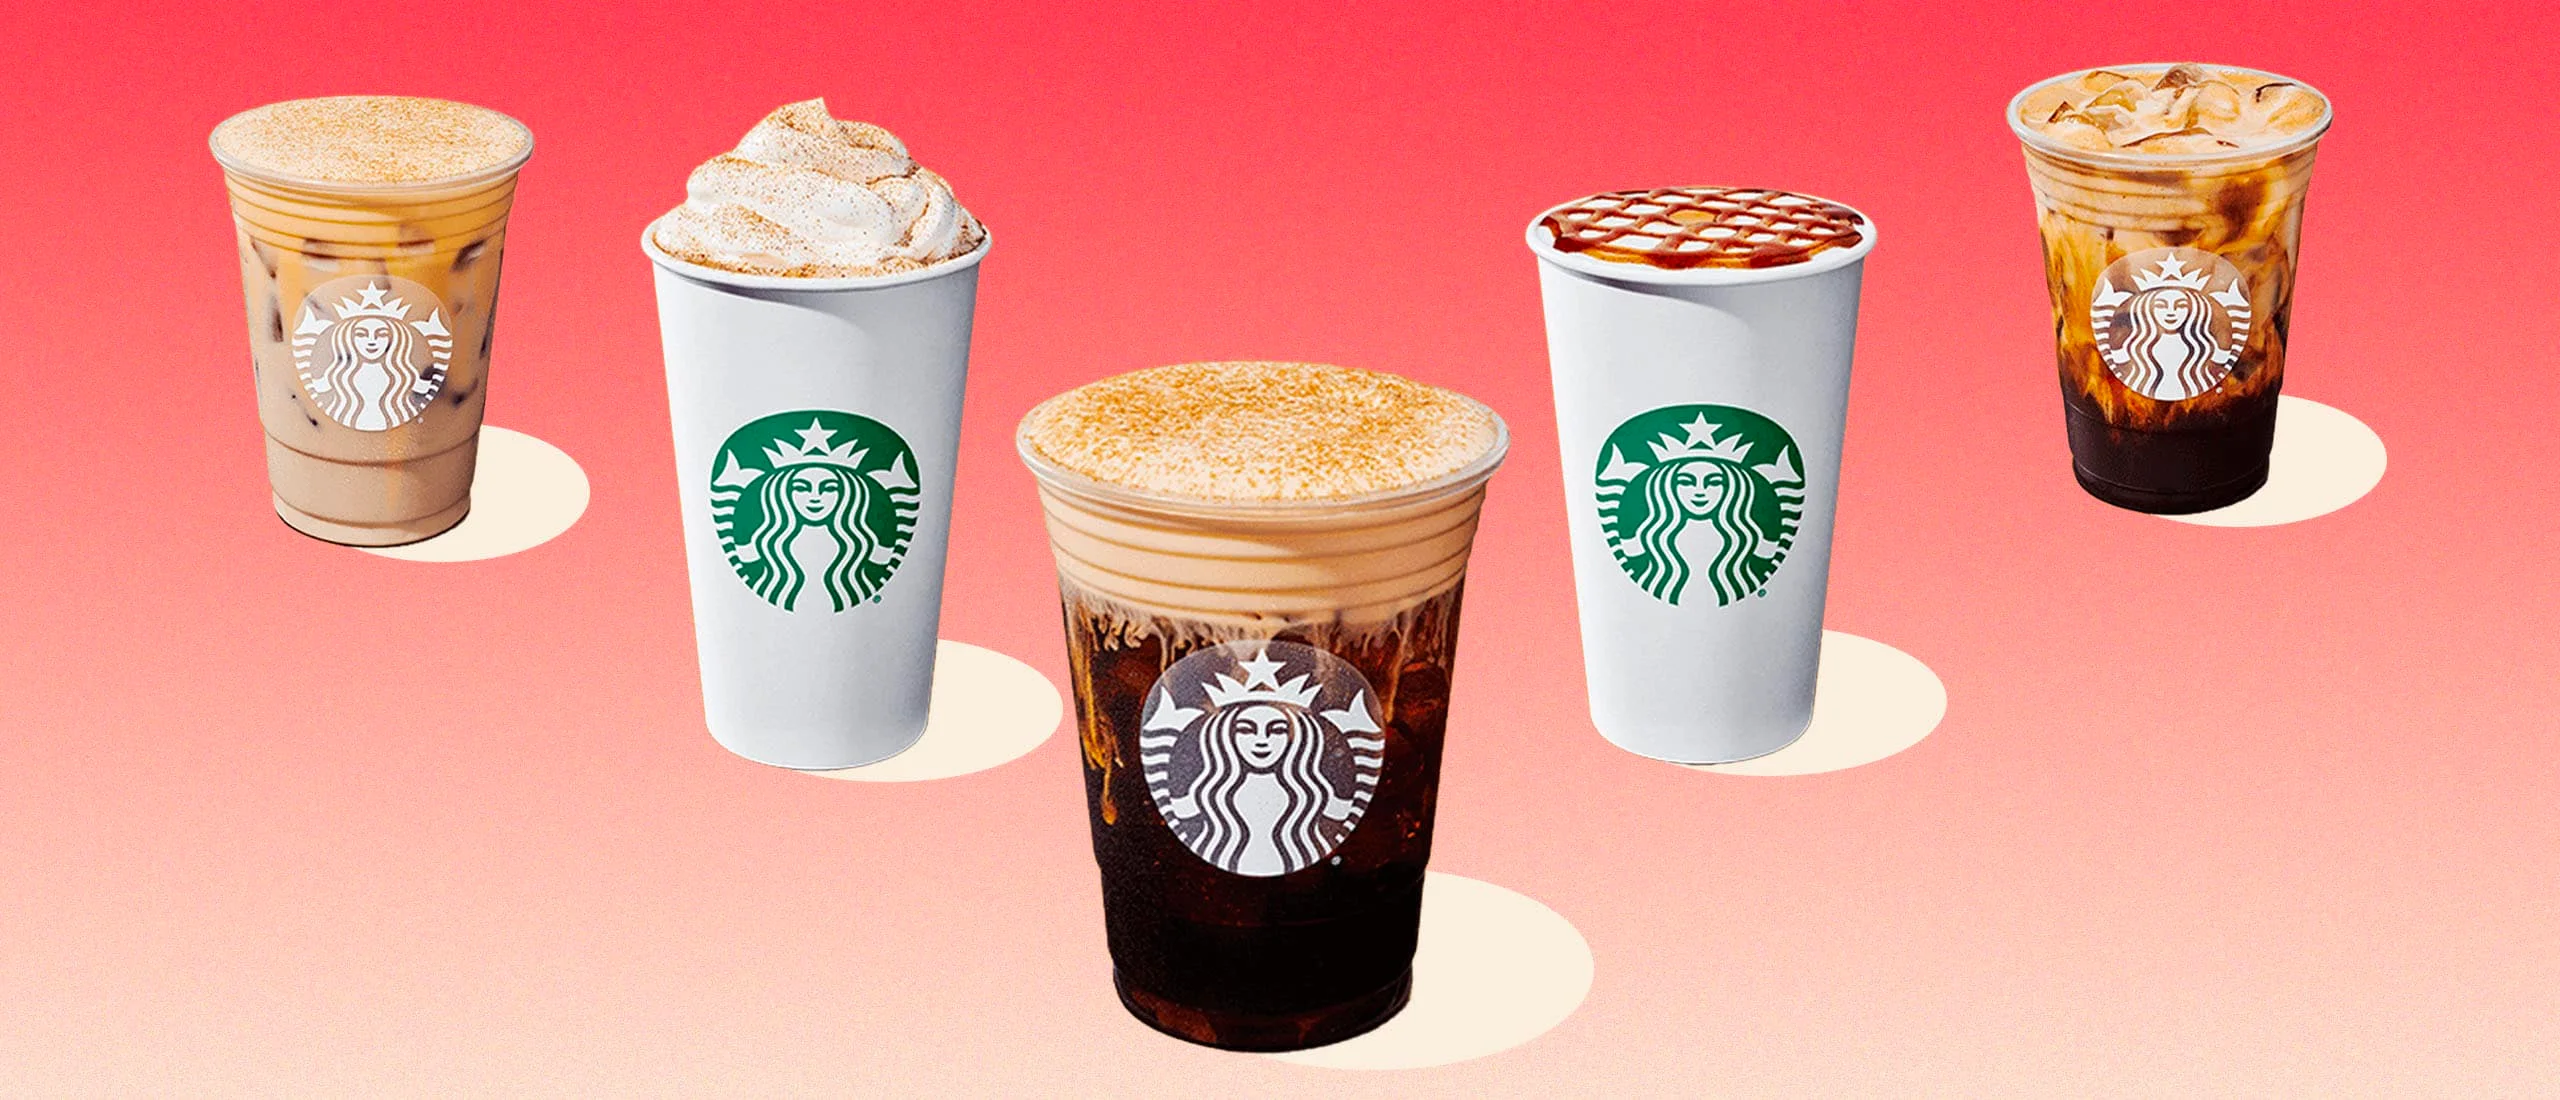 Starbucks drinks on a red background